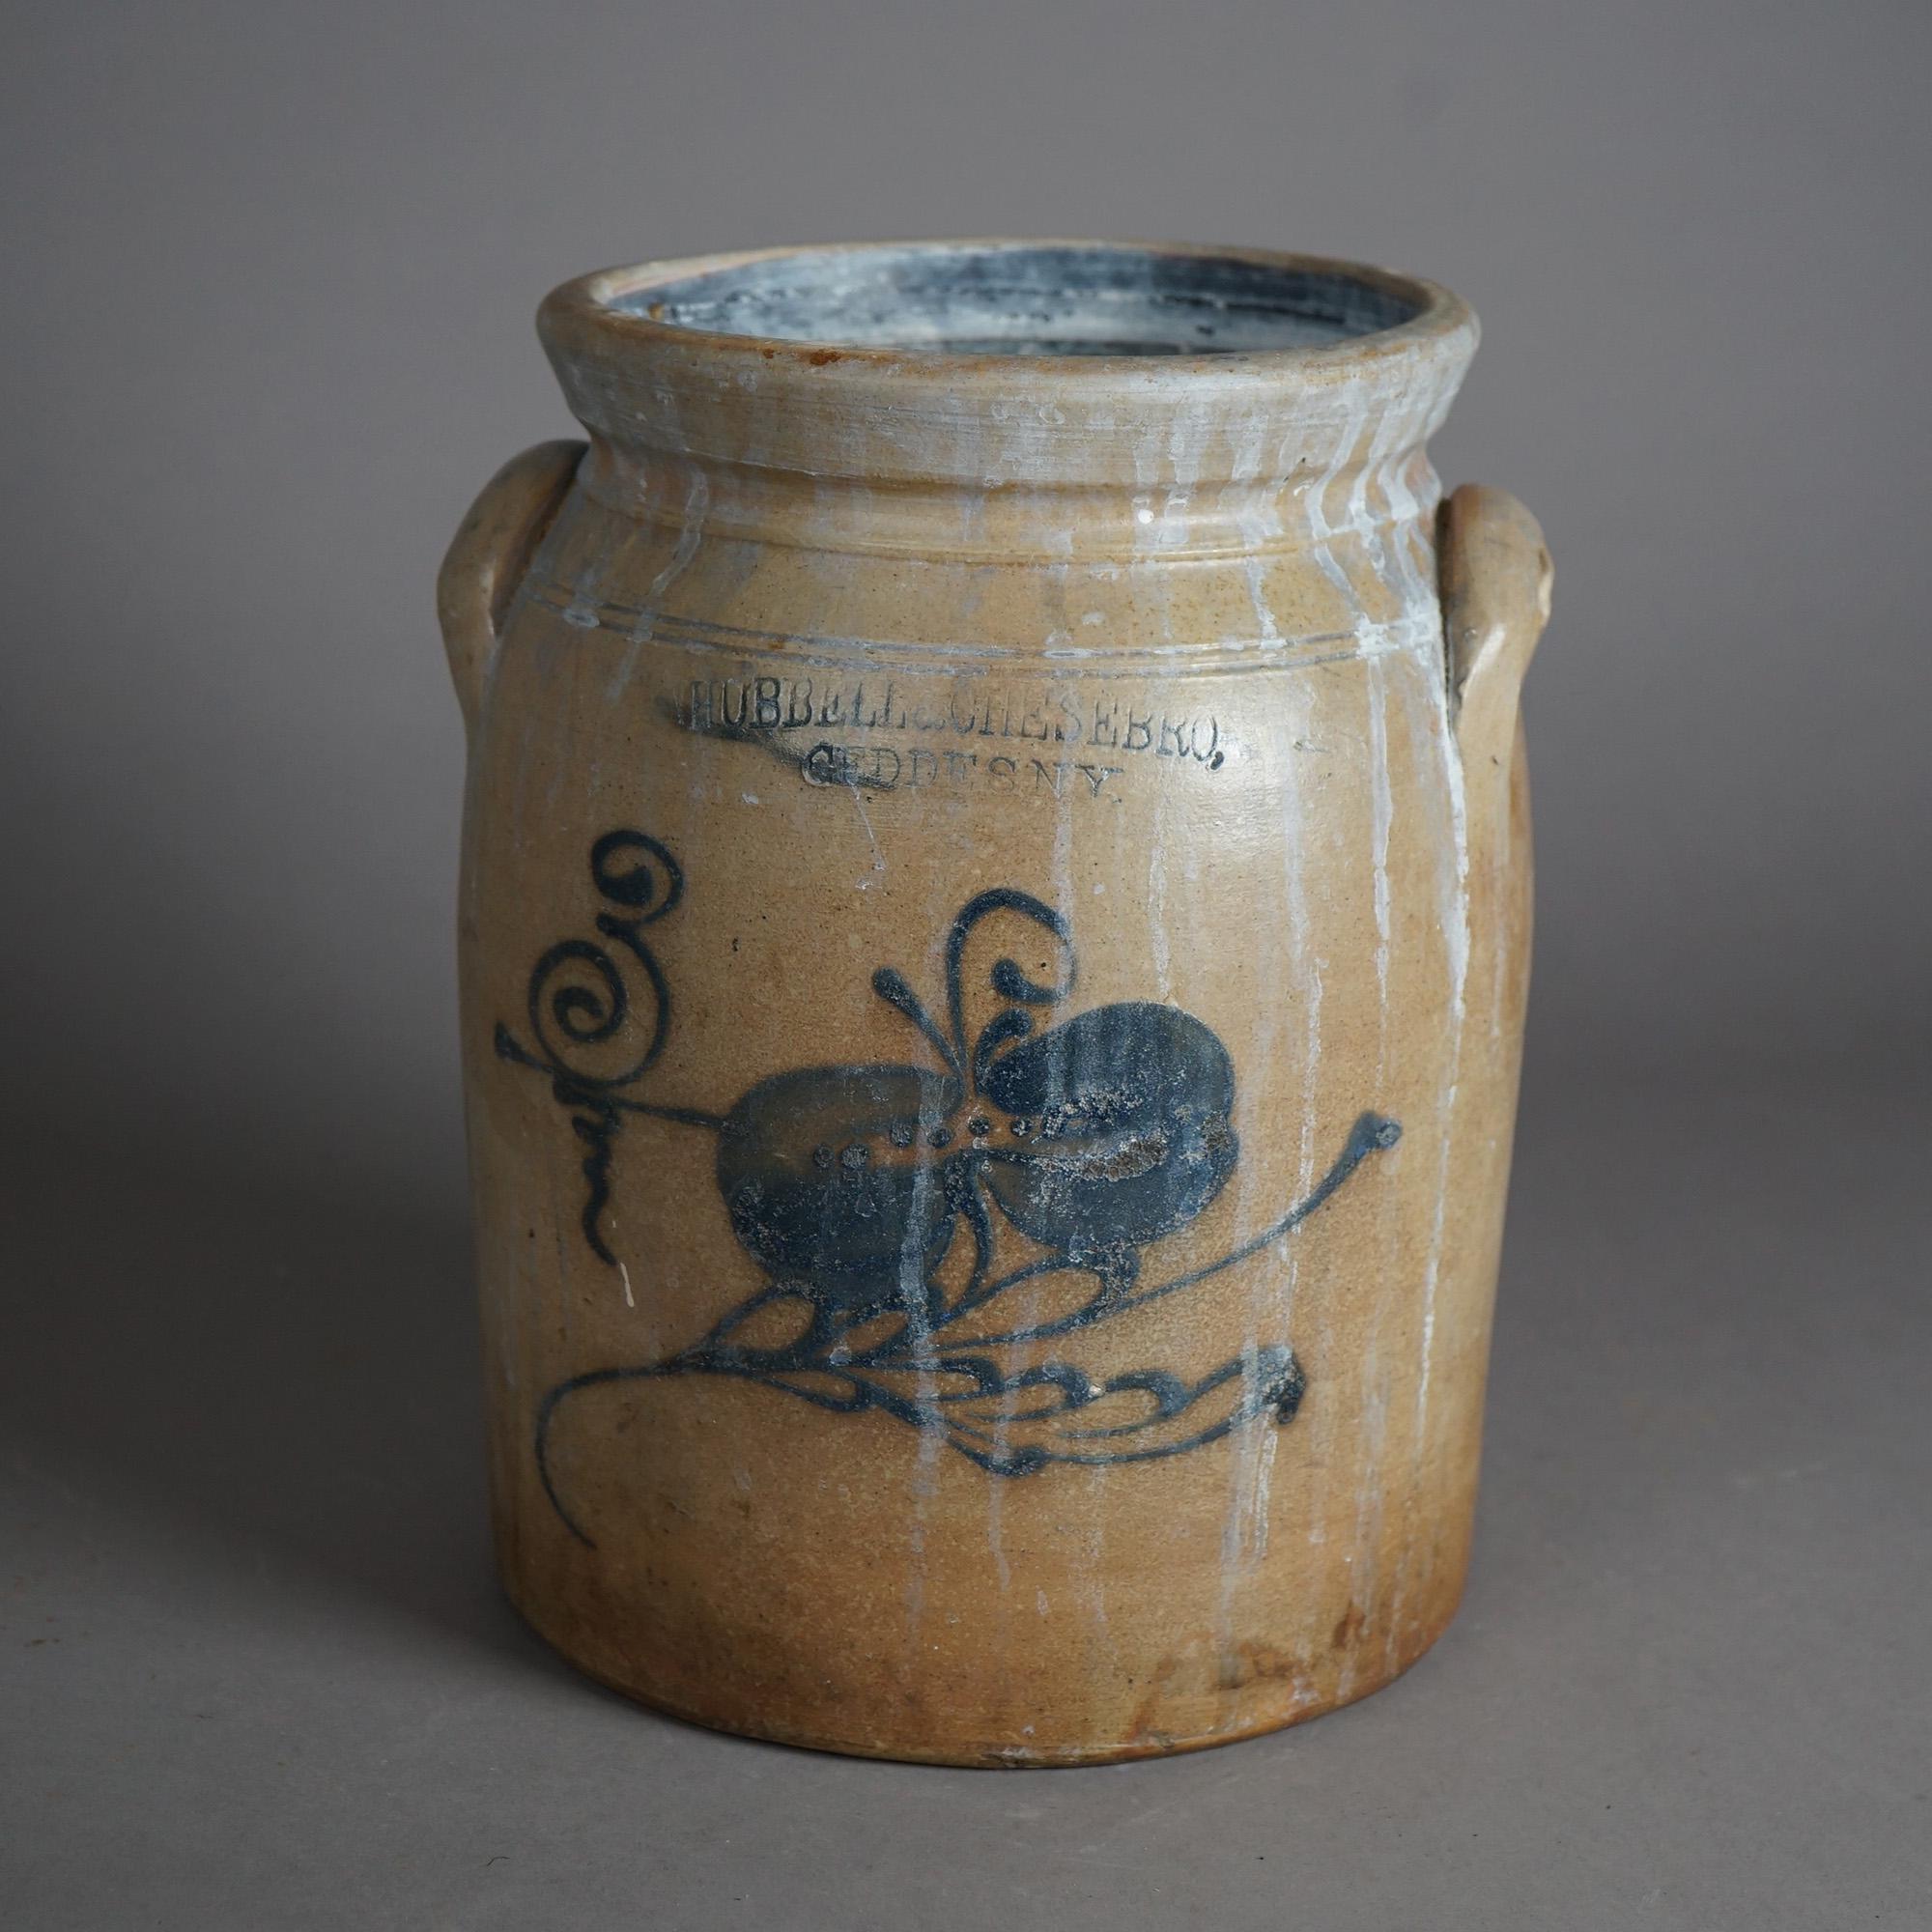 An antique stoneware salt glazed crock by Hubble And Chesebro offers blue decorated floral design, double handles and maker stamp as photographed, c1880

Measures- 12.25''H x 10''W x 10''D